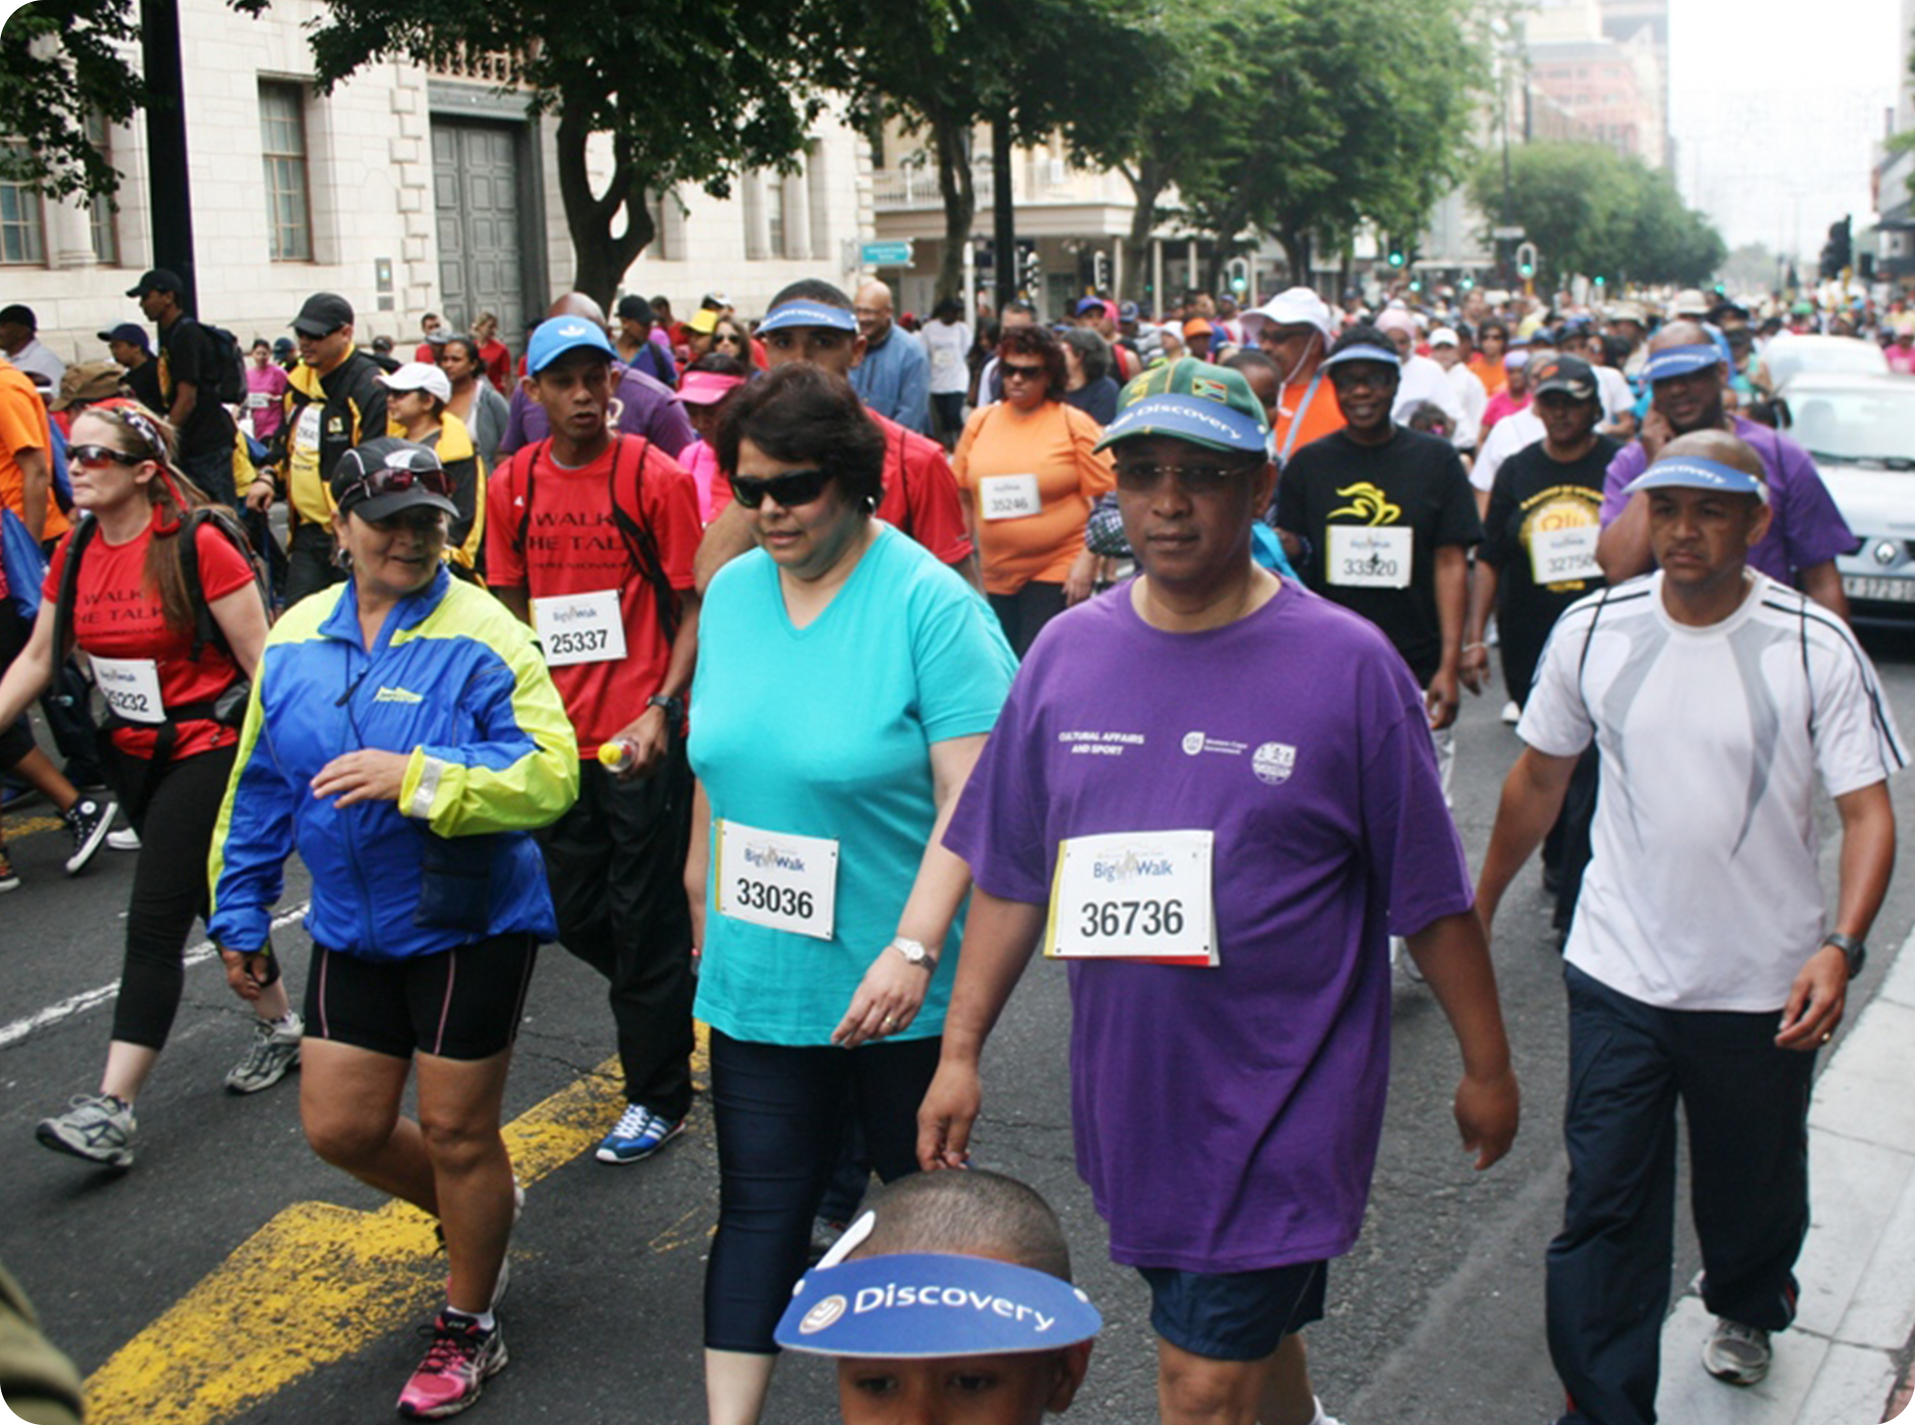 Dr Ivan Meyer doing the 10km Big Walk from the Grand Parade, Cape Town